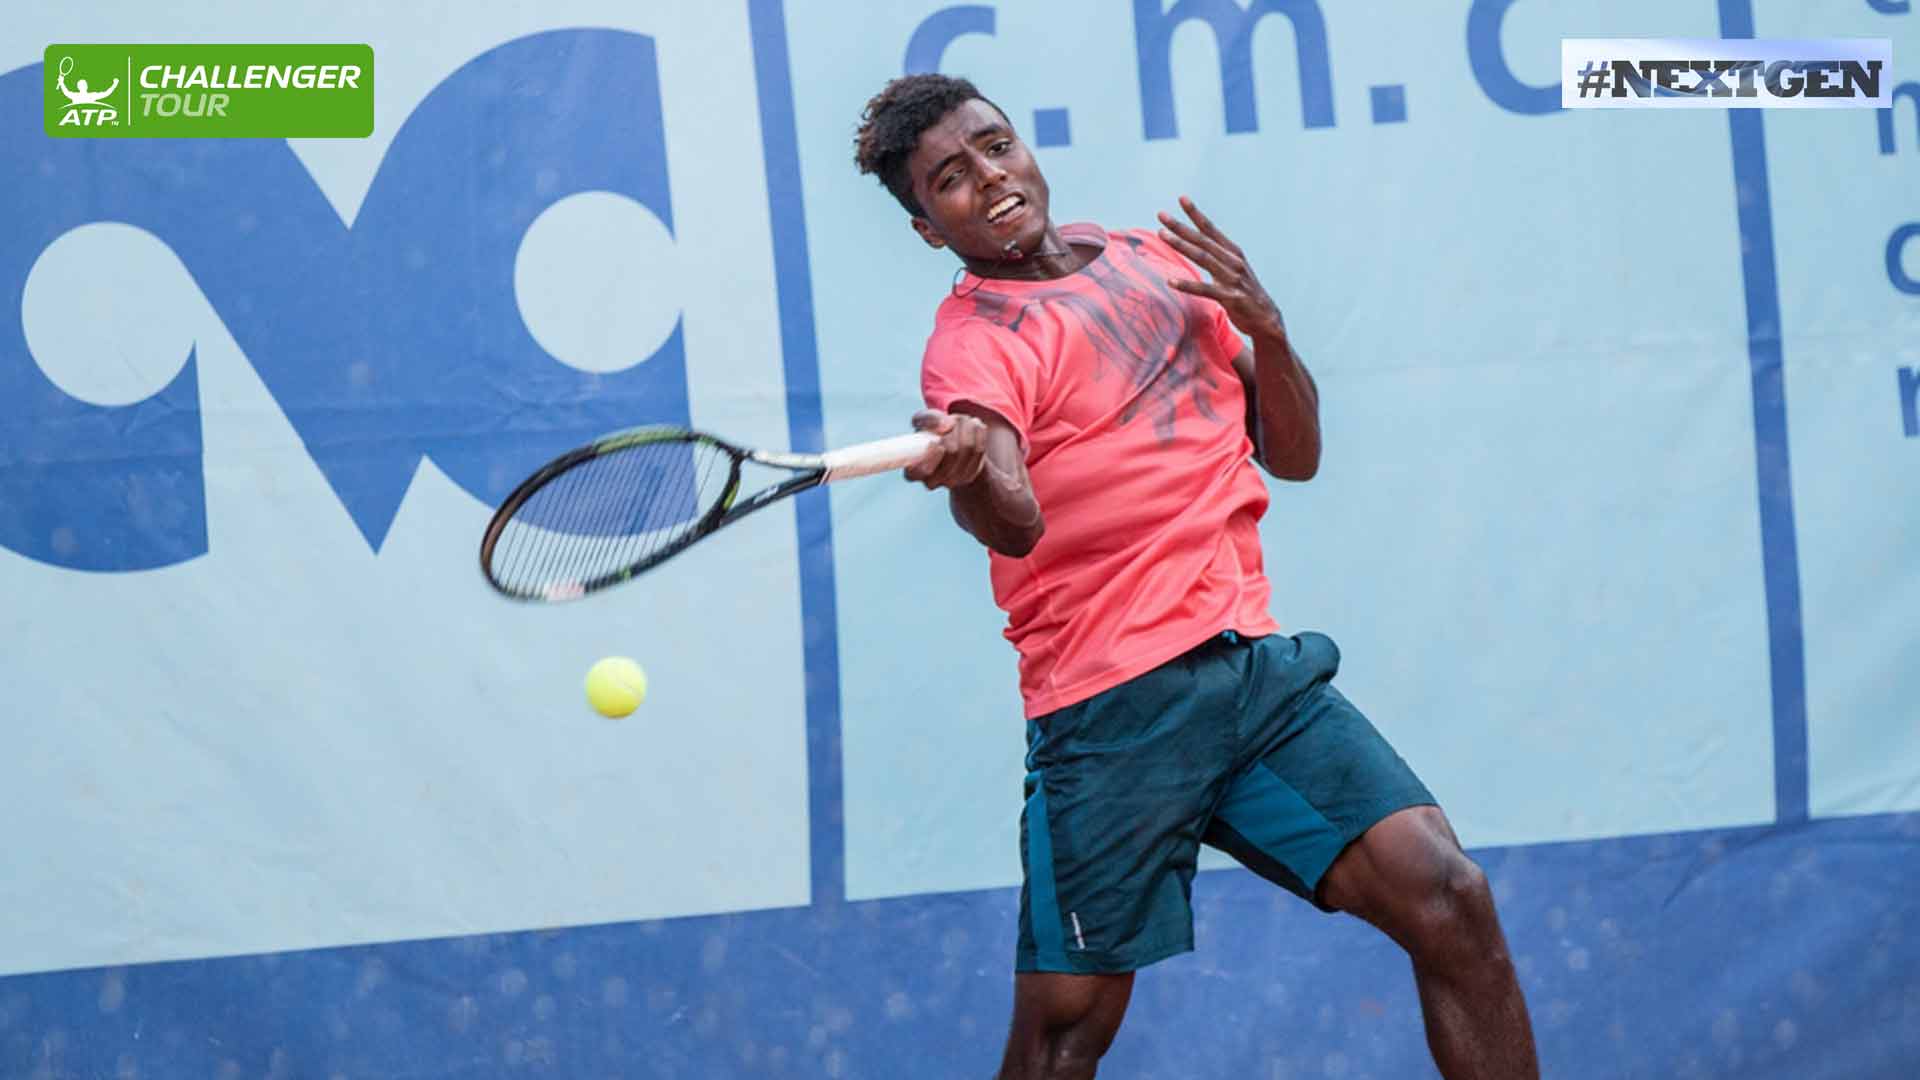 Elias Ymer is playing two clay court events in Italy this month on the ATP Challenger Tour.